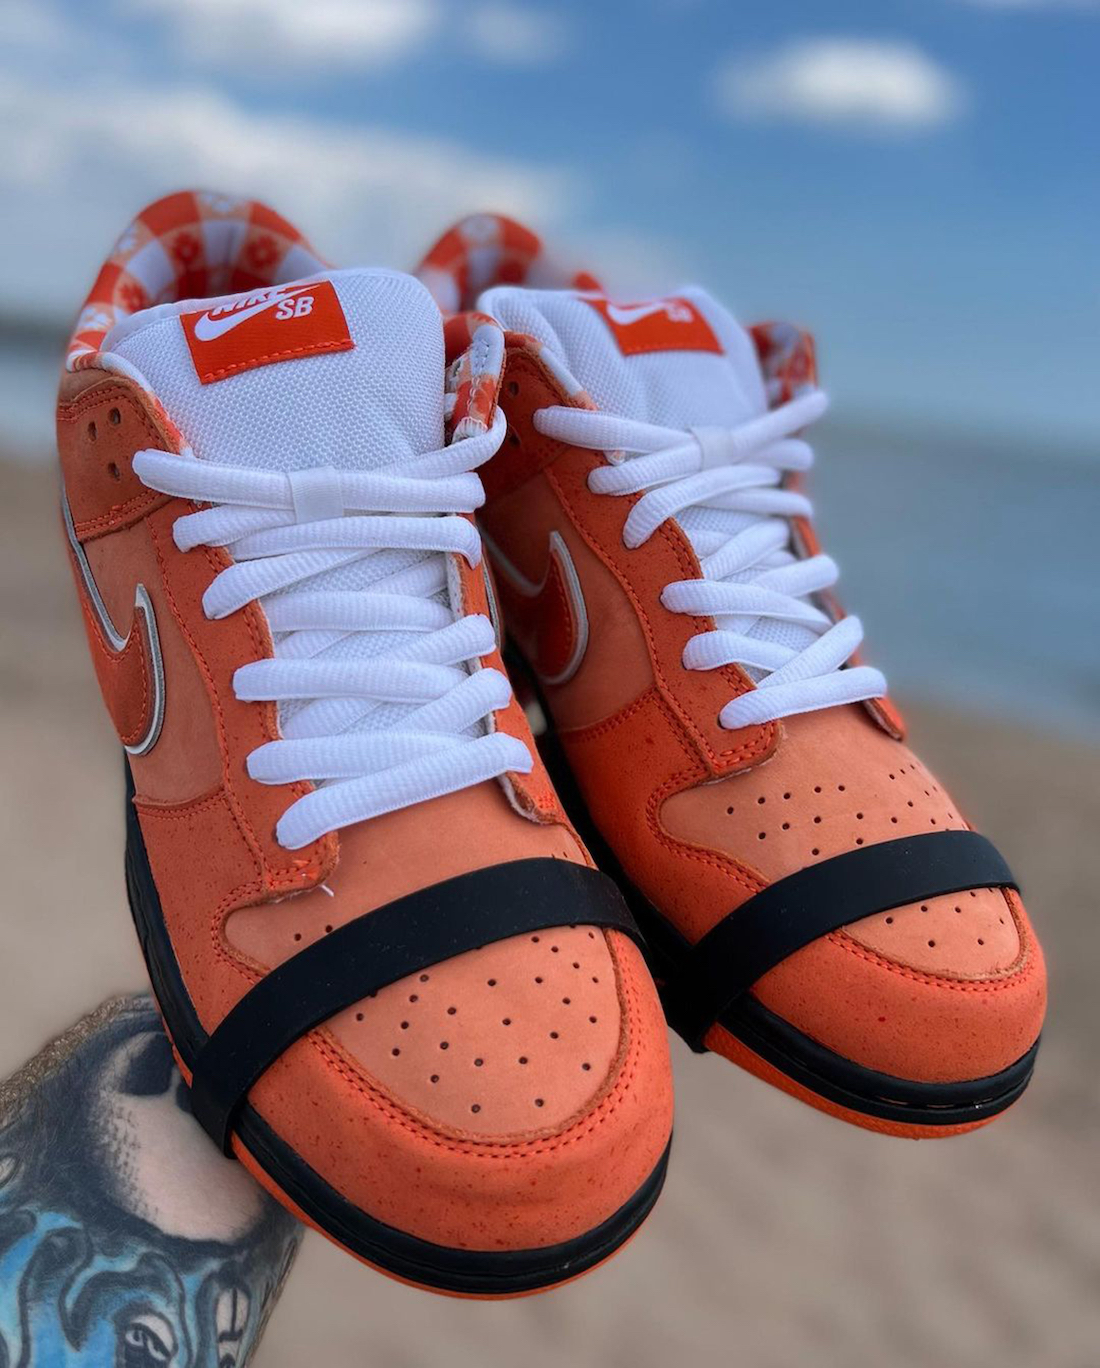 Concepts Nike SB Dunk Low Orange Lobster FD8776 800 In Hand 1